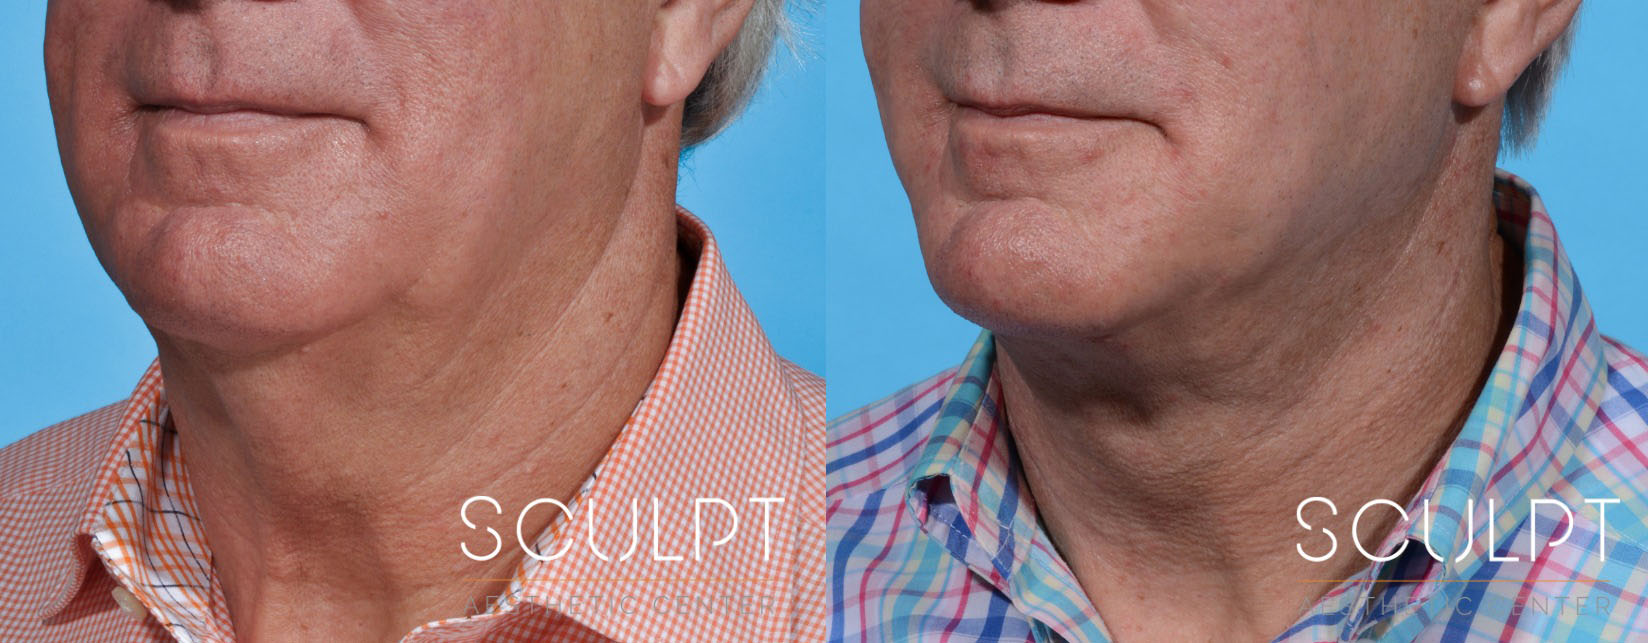 Face and Jawline Contouring Before and After Photo by Sculpt Aesthetic Center in Frisco, TX